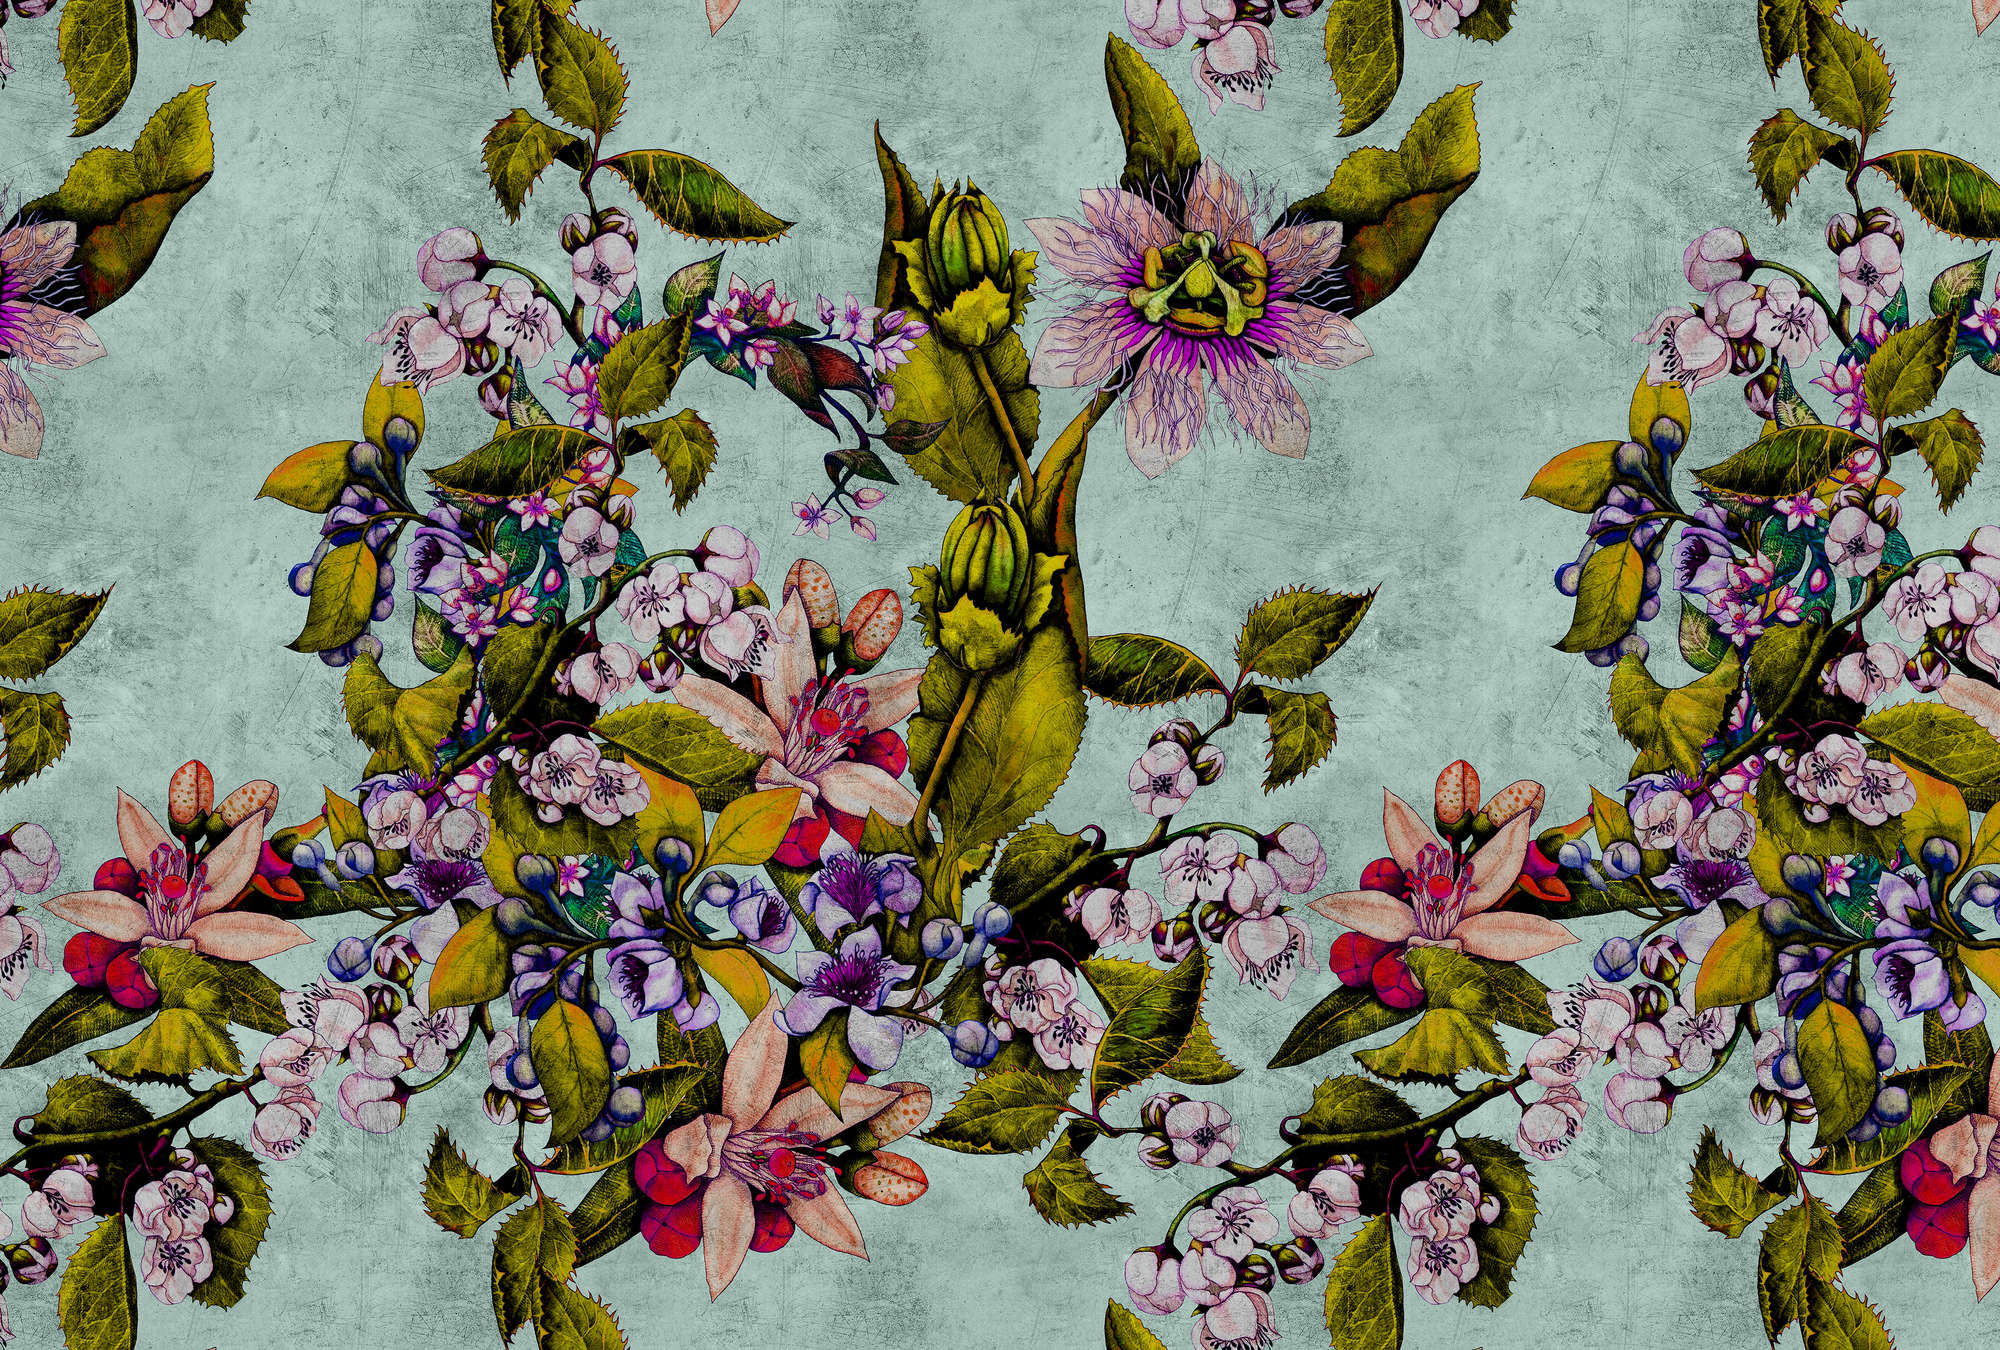             Tropical Passion 2 - Scratchy Textured Wallpaper with Blossoms and Buds - Green | Matt Smooth Non-woven
        